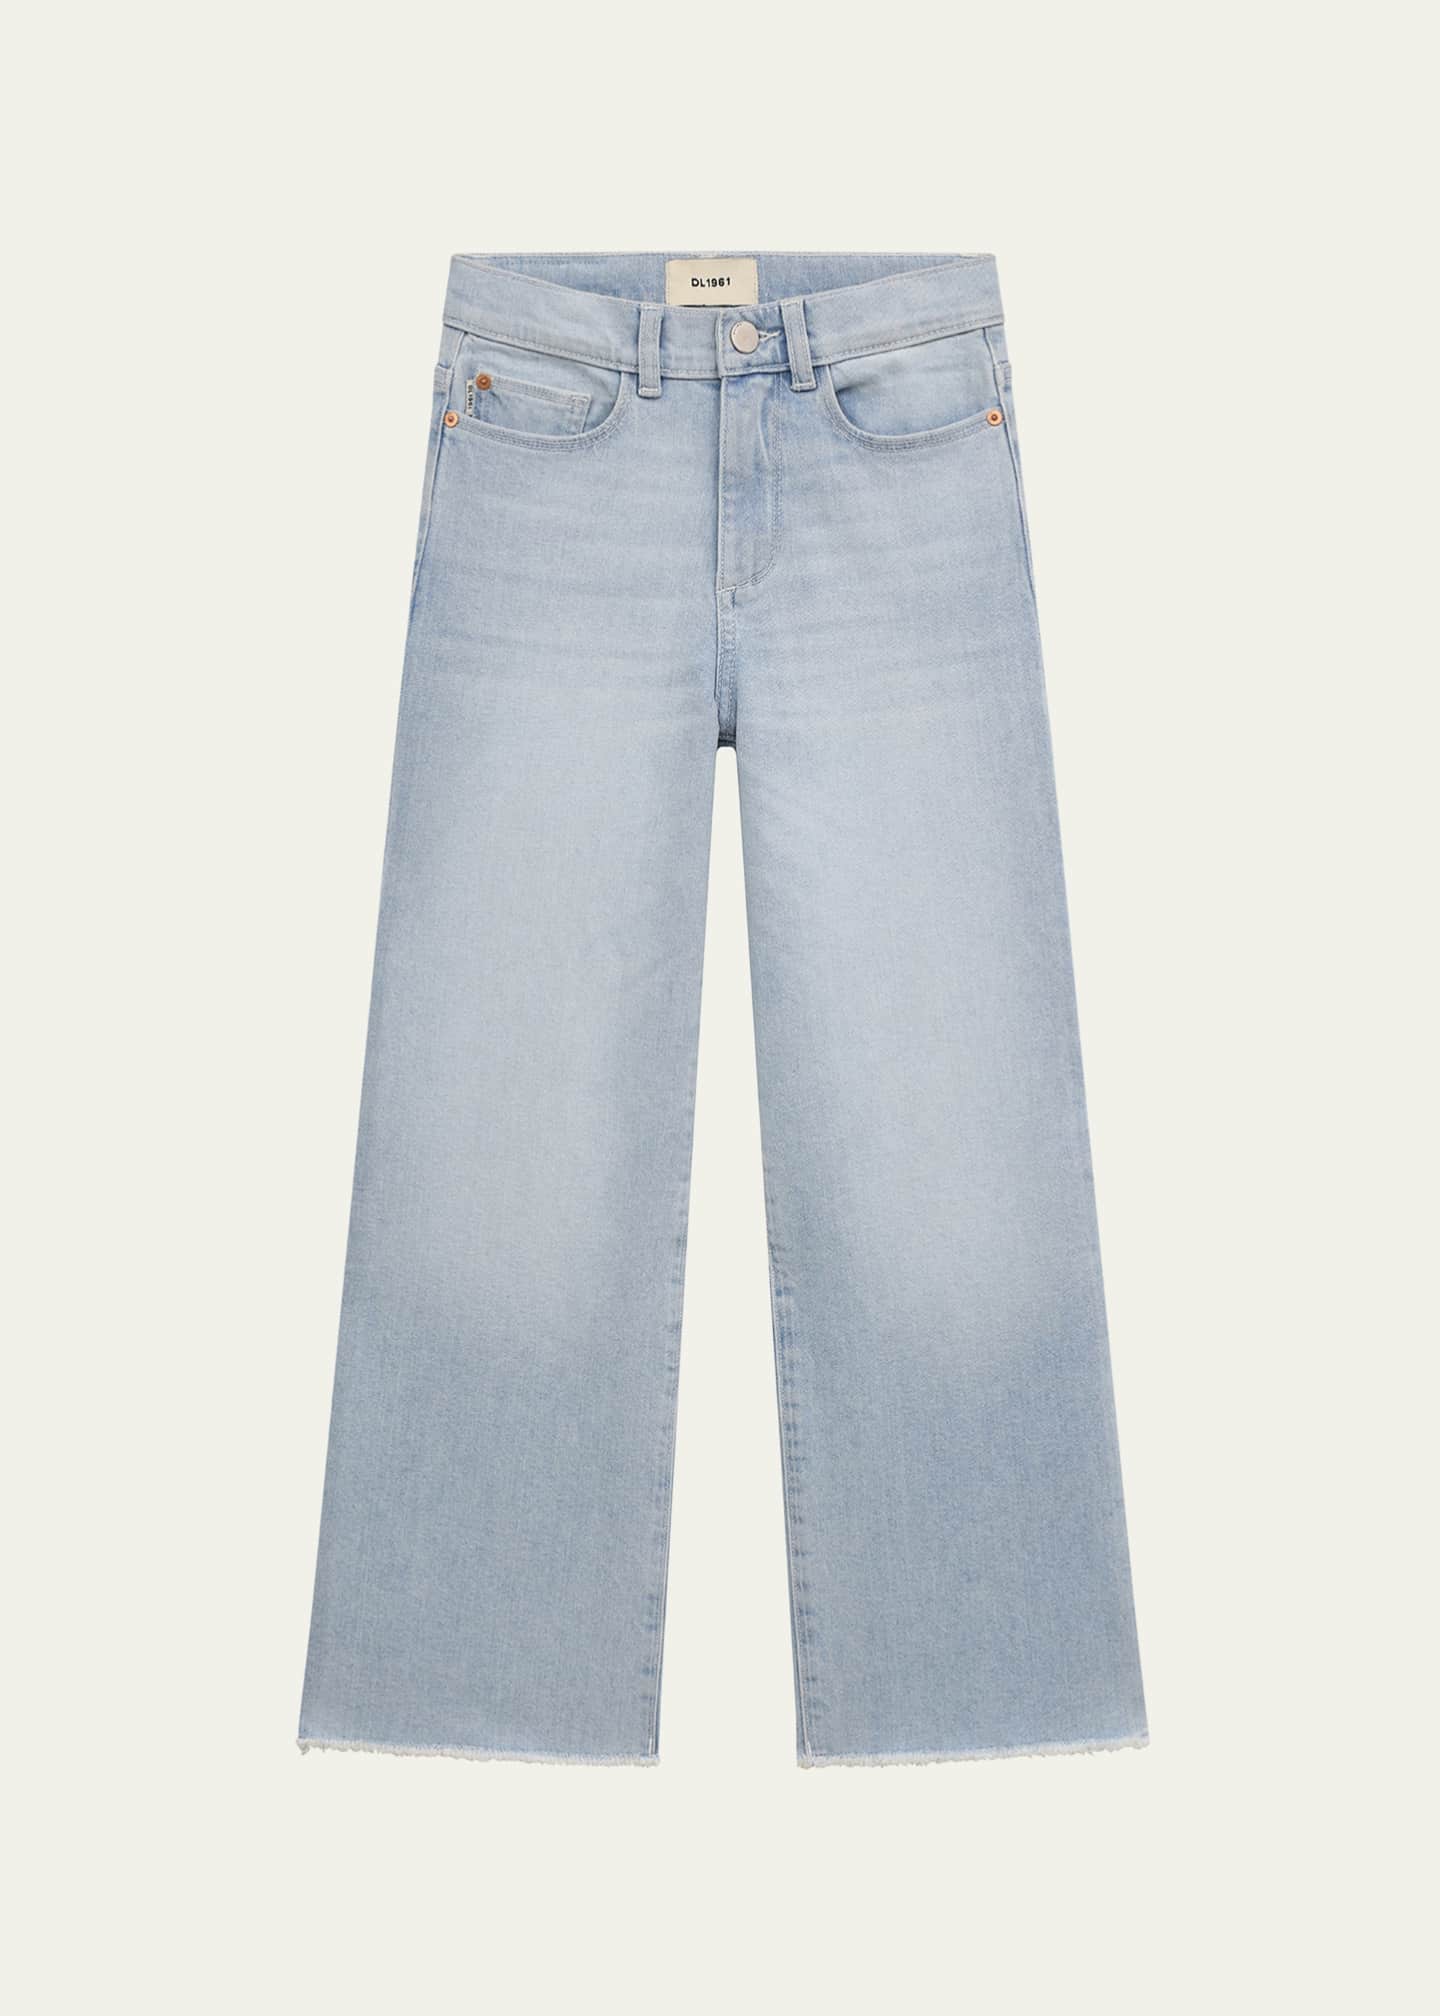 DL1961 Girl's Lily High Rise Wide Leg Jeans, Size 7-16 - Bergdorf